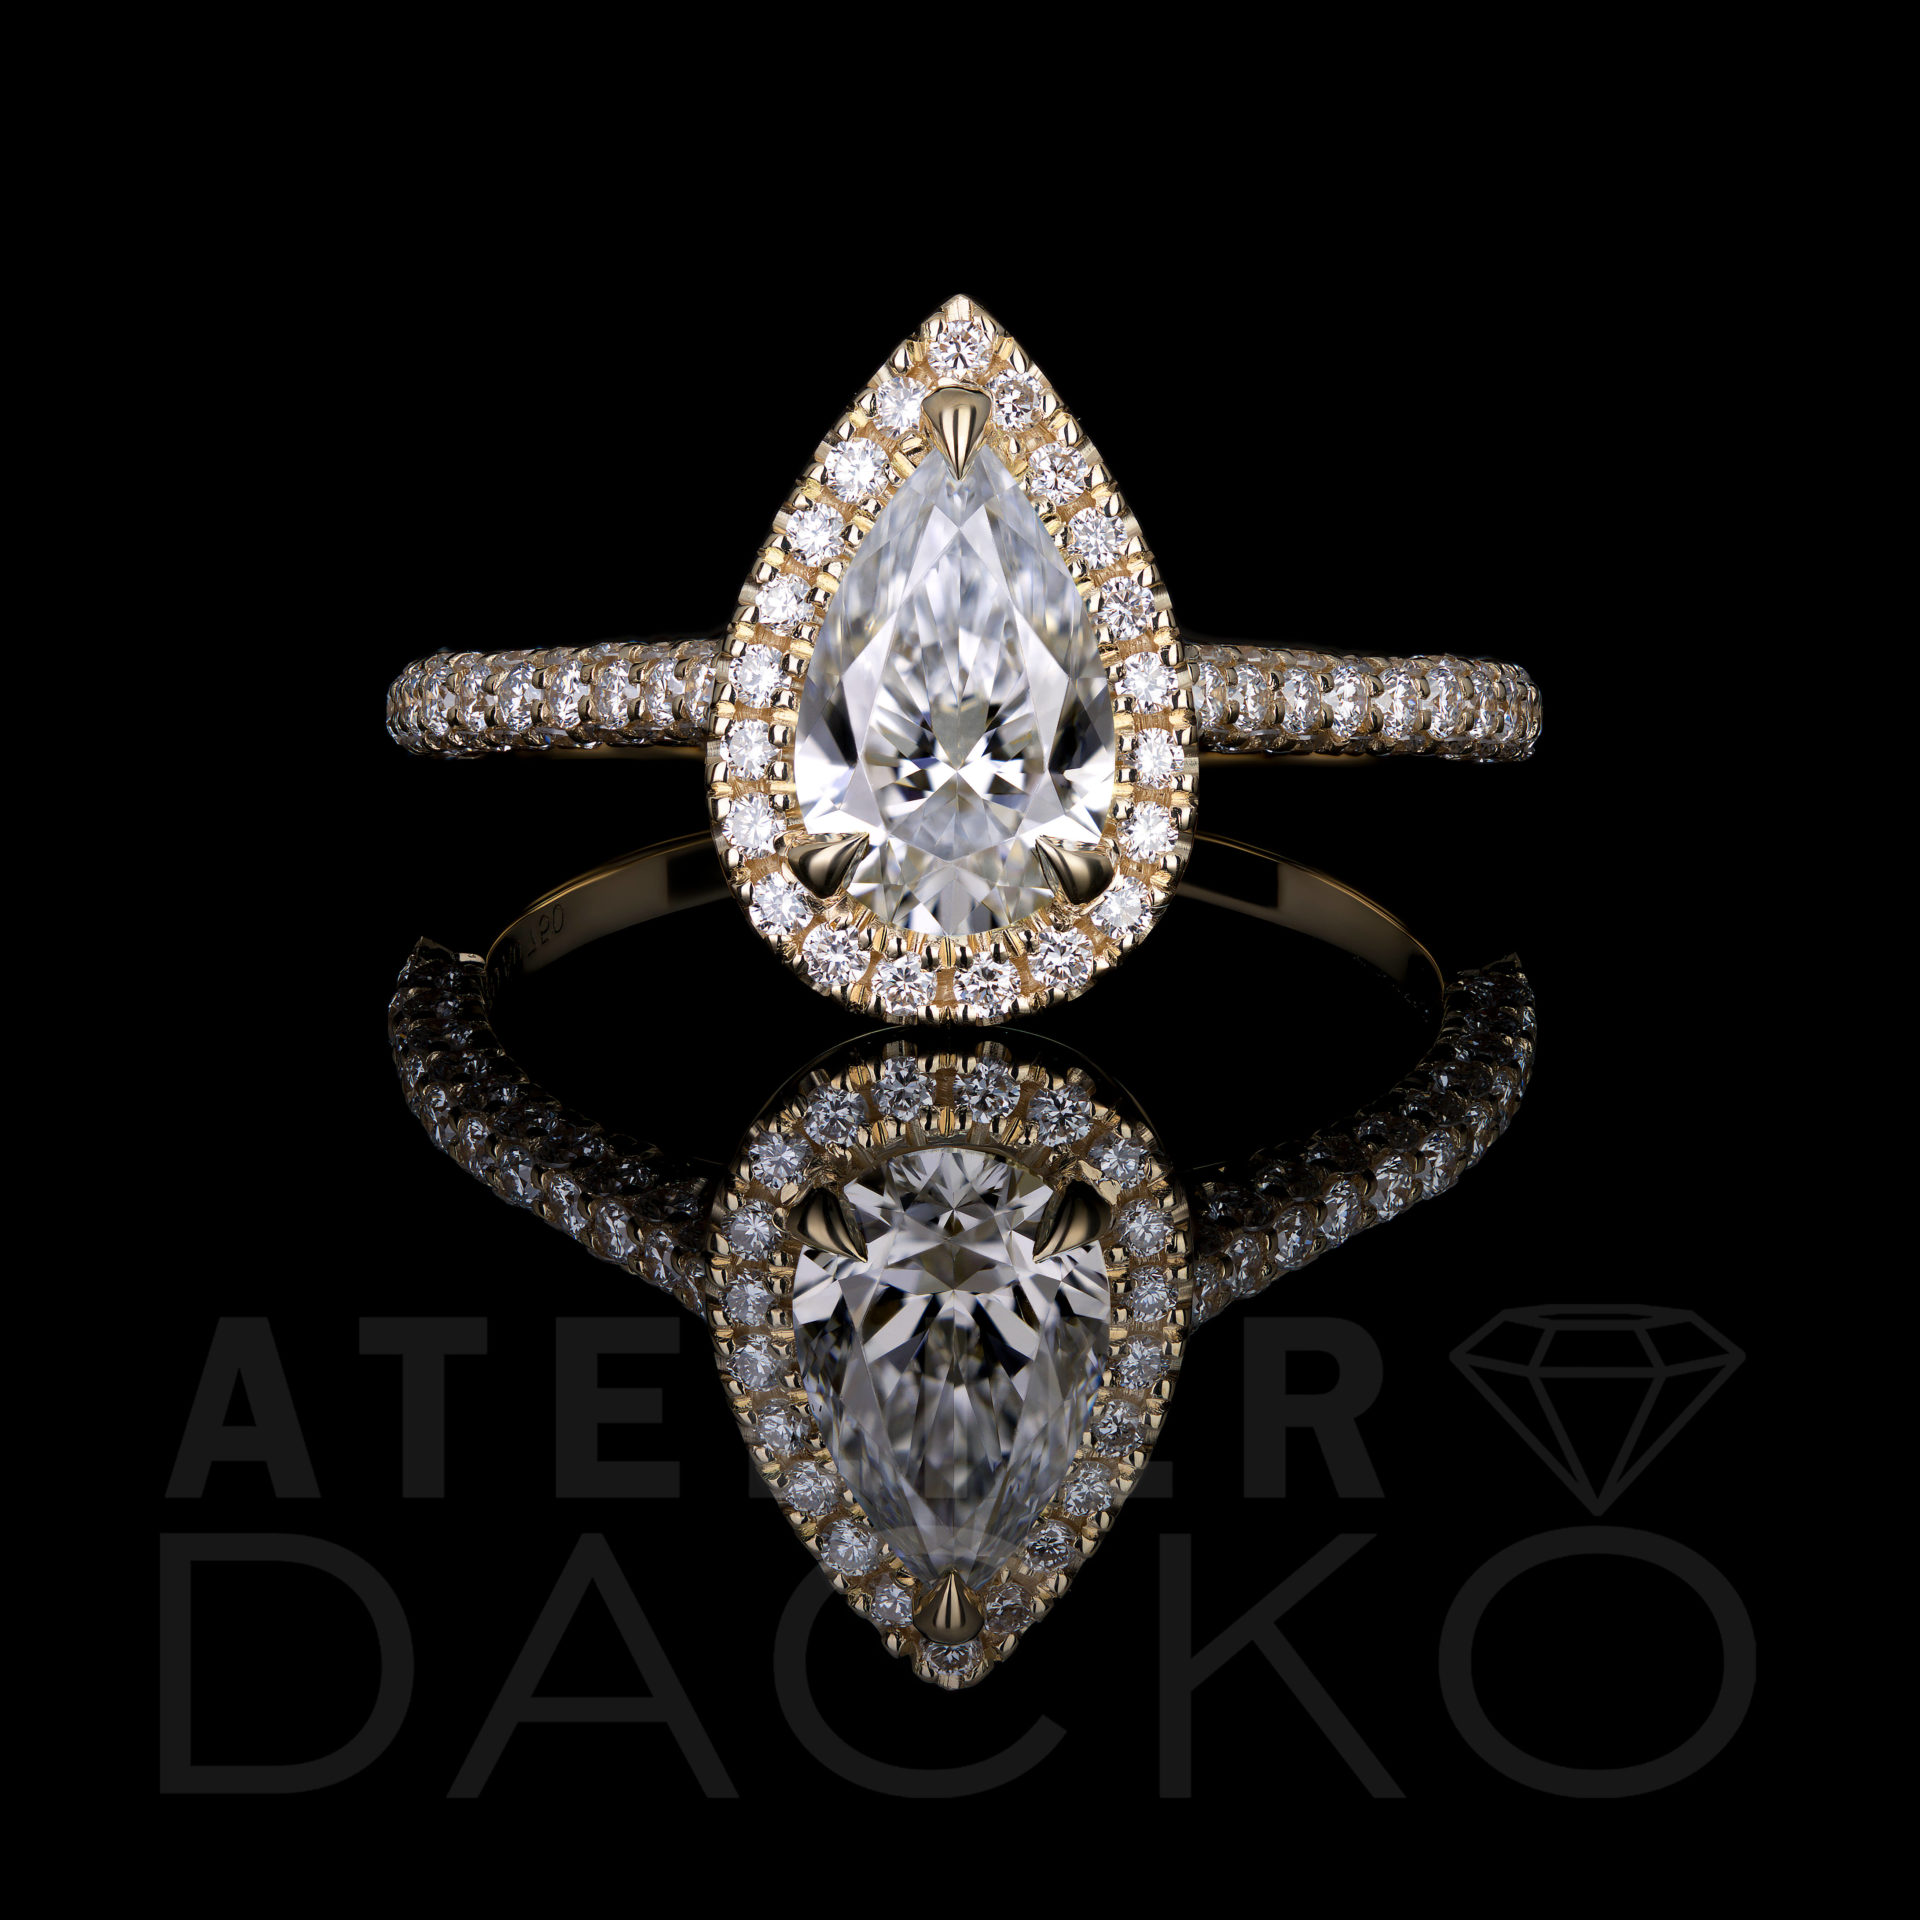 Front Facing 1.00 CT Pear Shape Diamond Engagement Ring with 3 Sided Shank